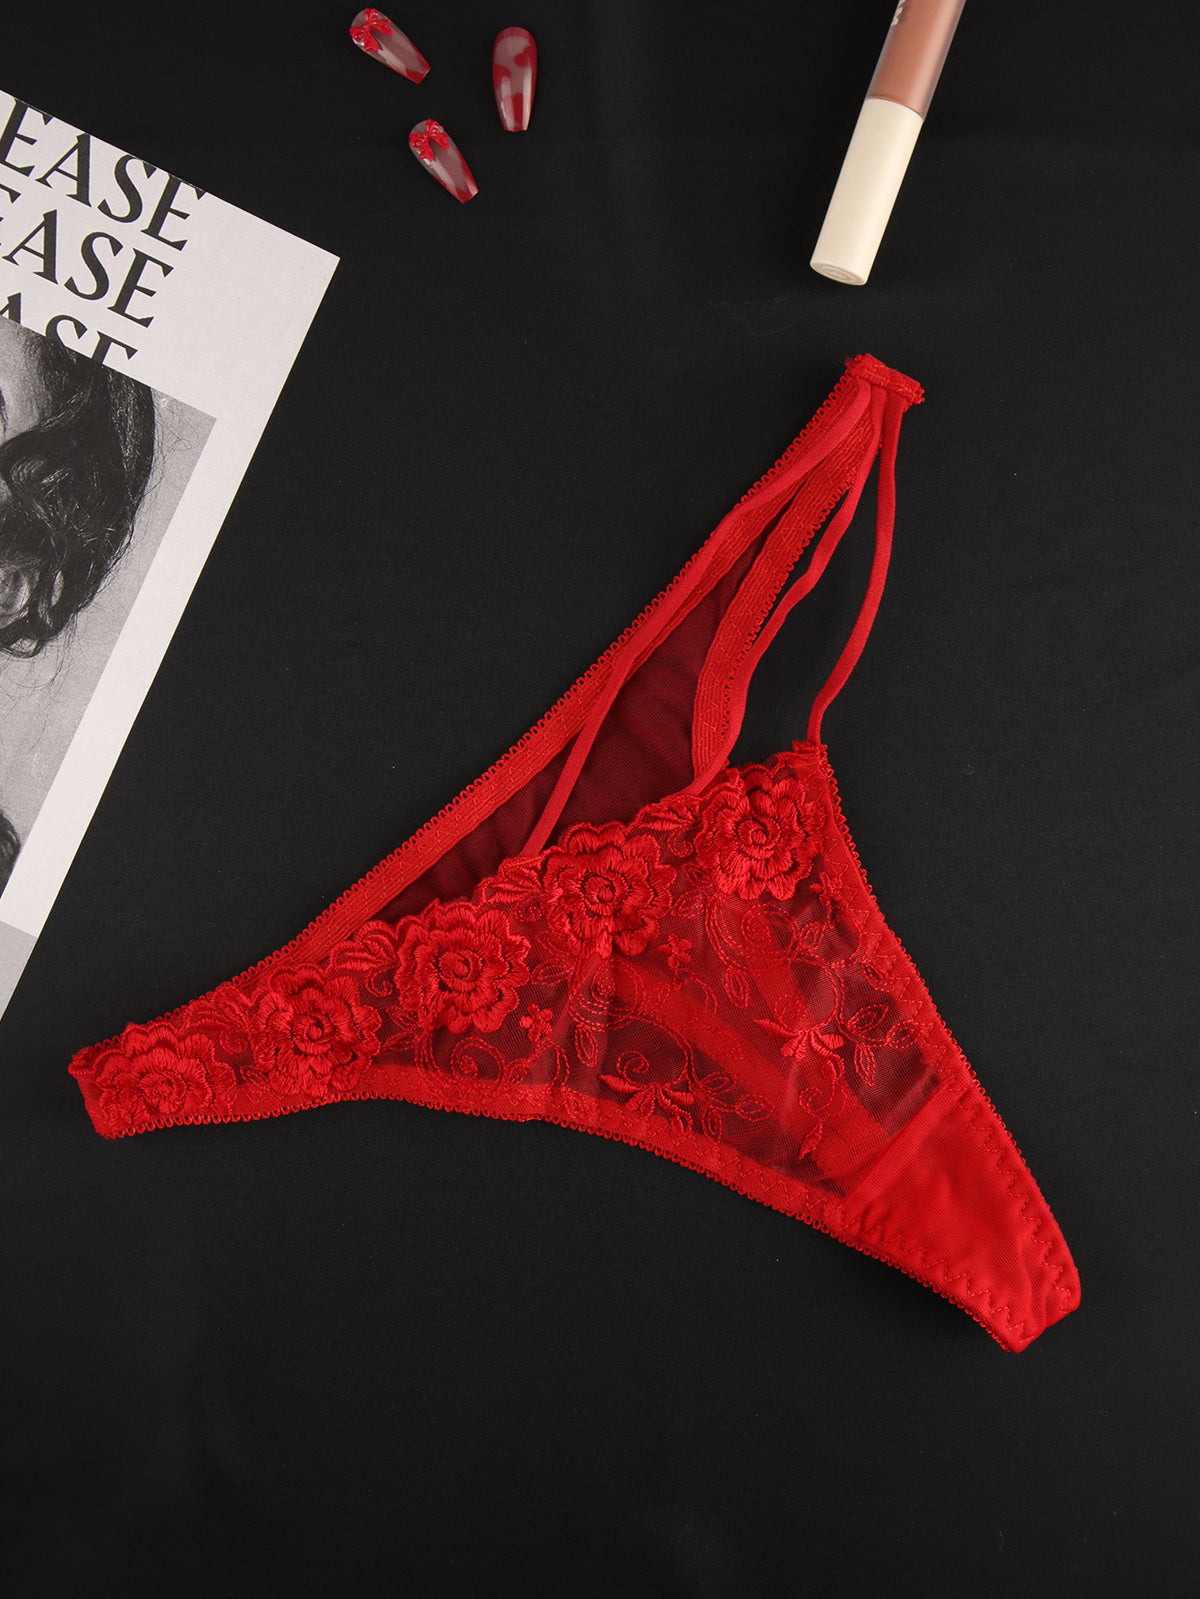 Thongs Floral Lace G-String - ED